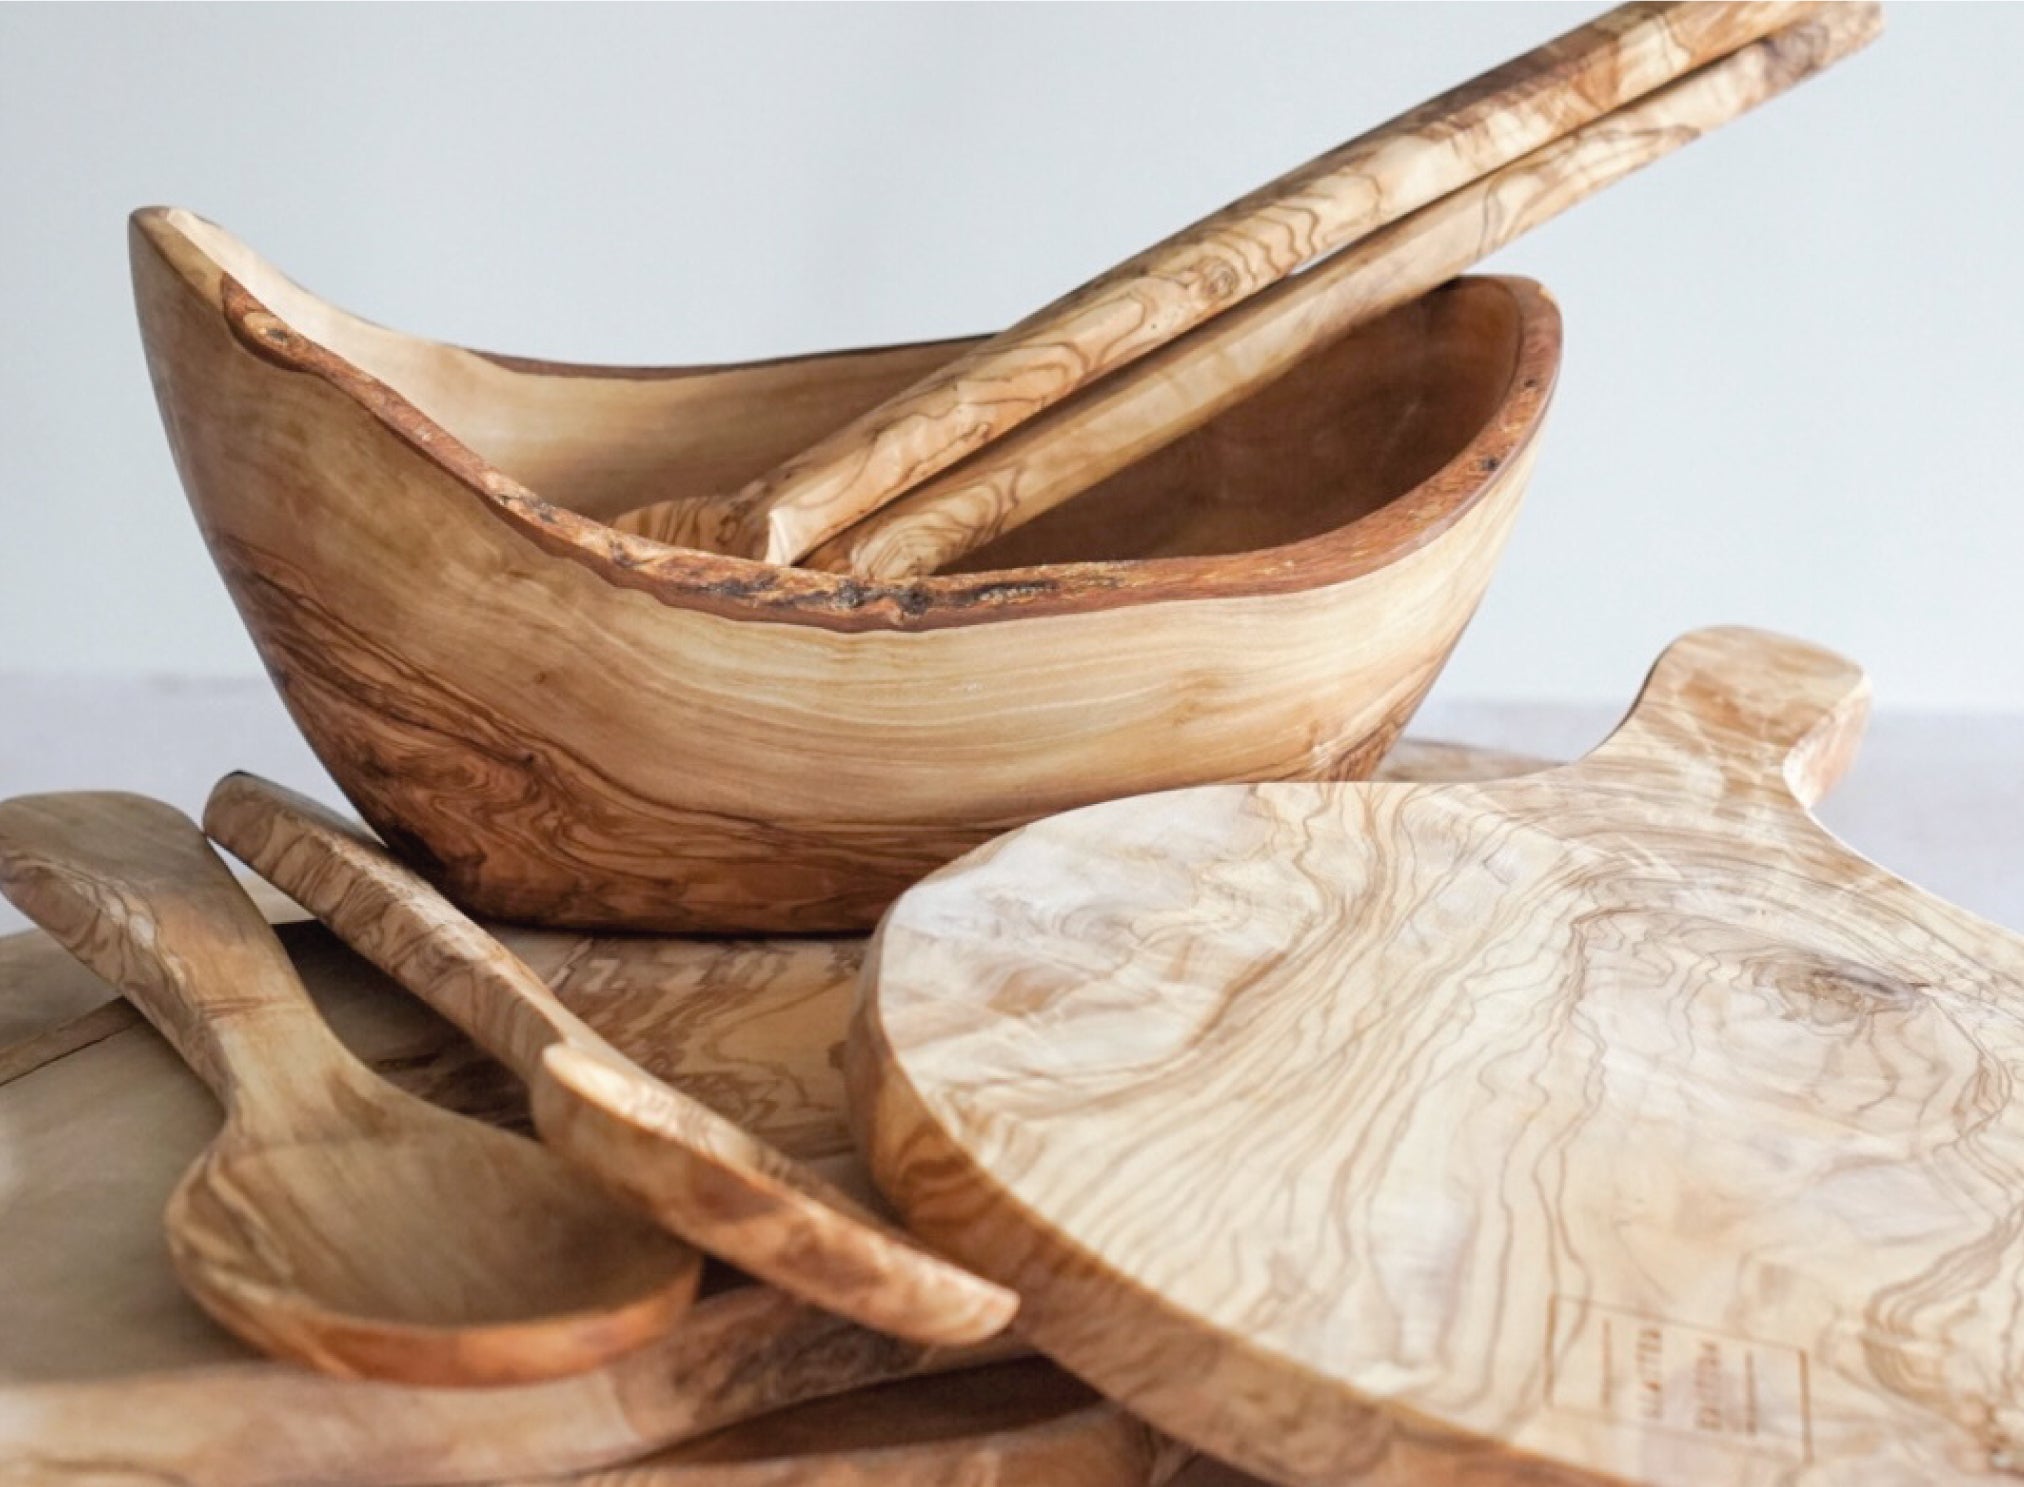 Olive wood serving bowl and serving spoon set handmade in Tunisia with ethically sourced olive wood